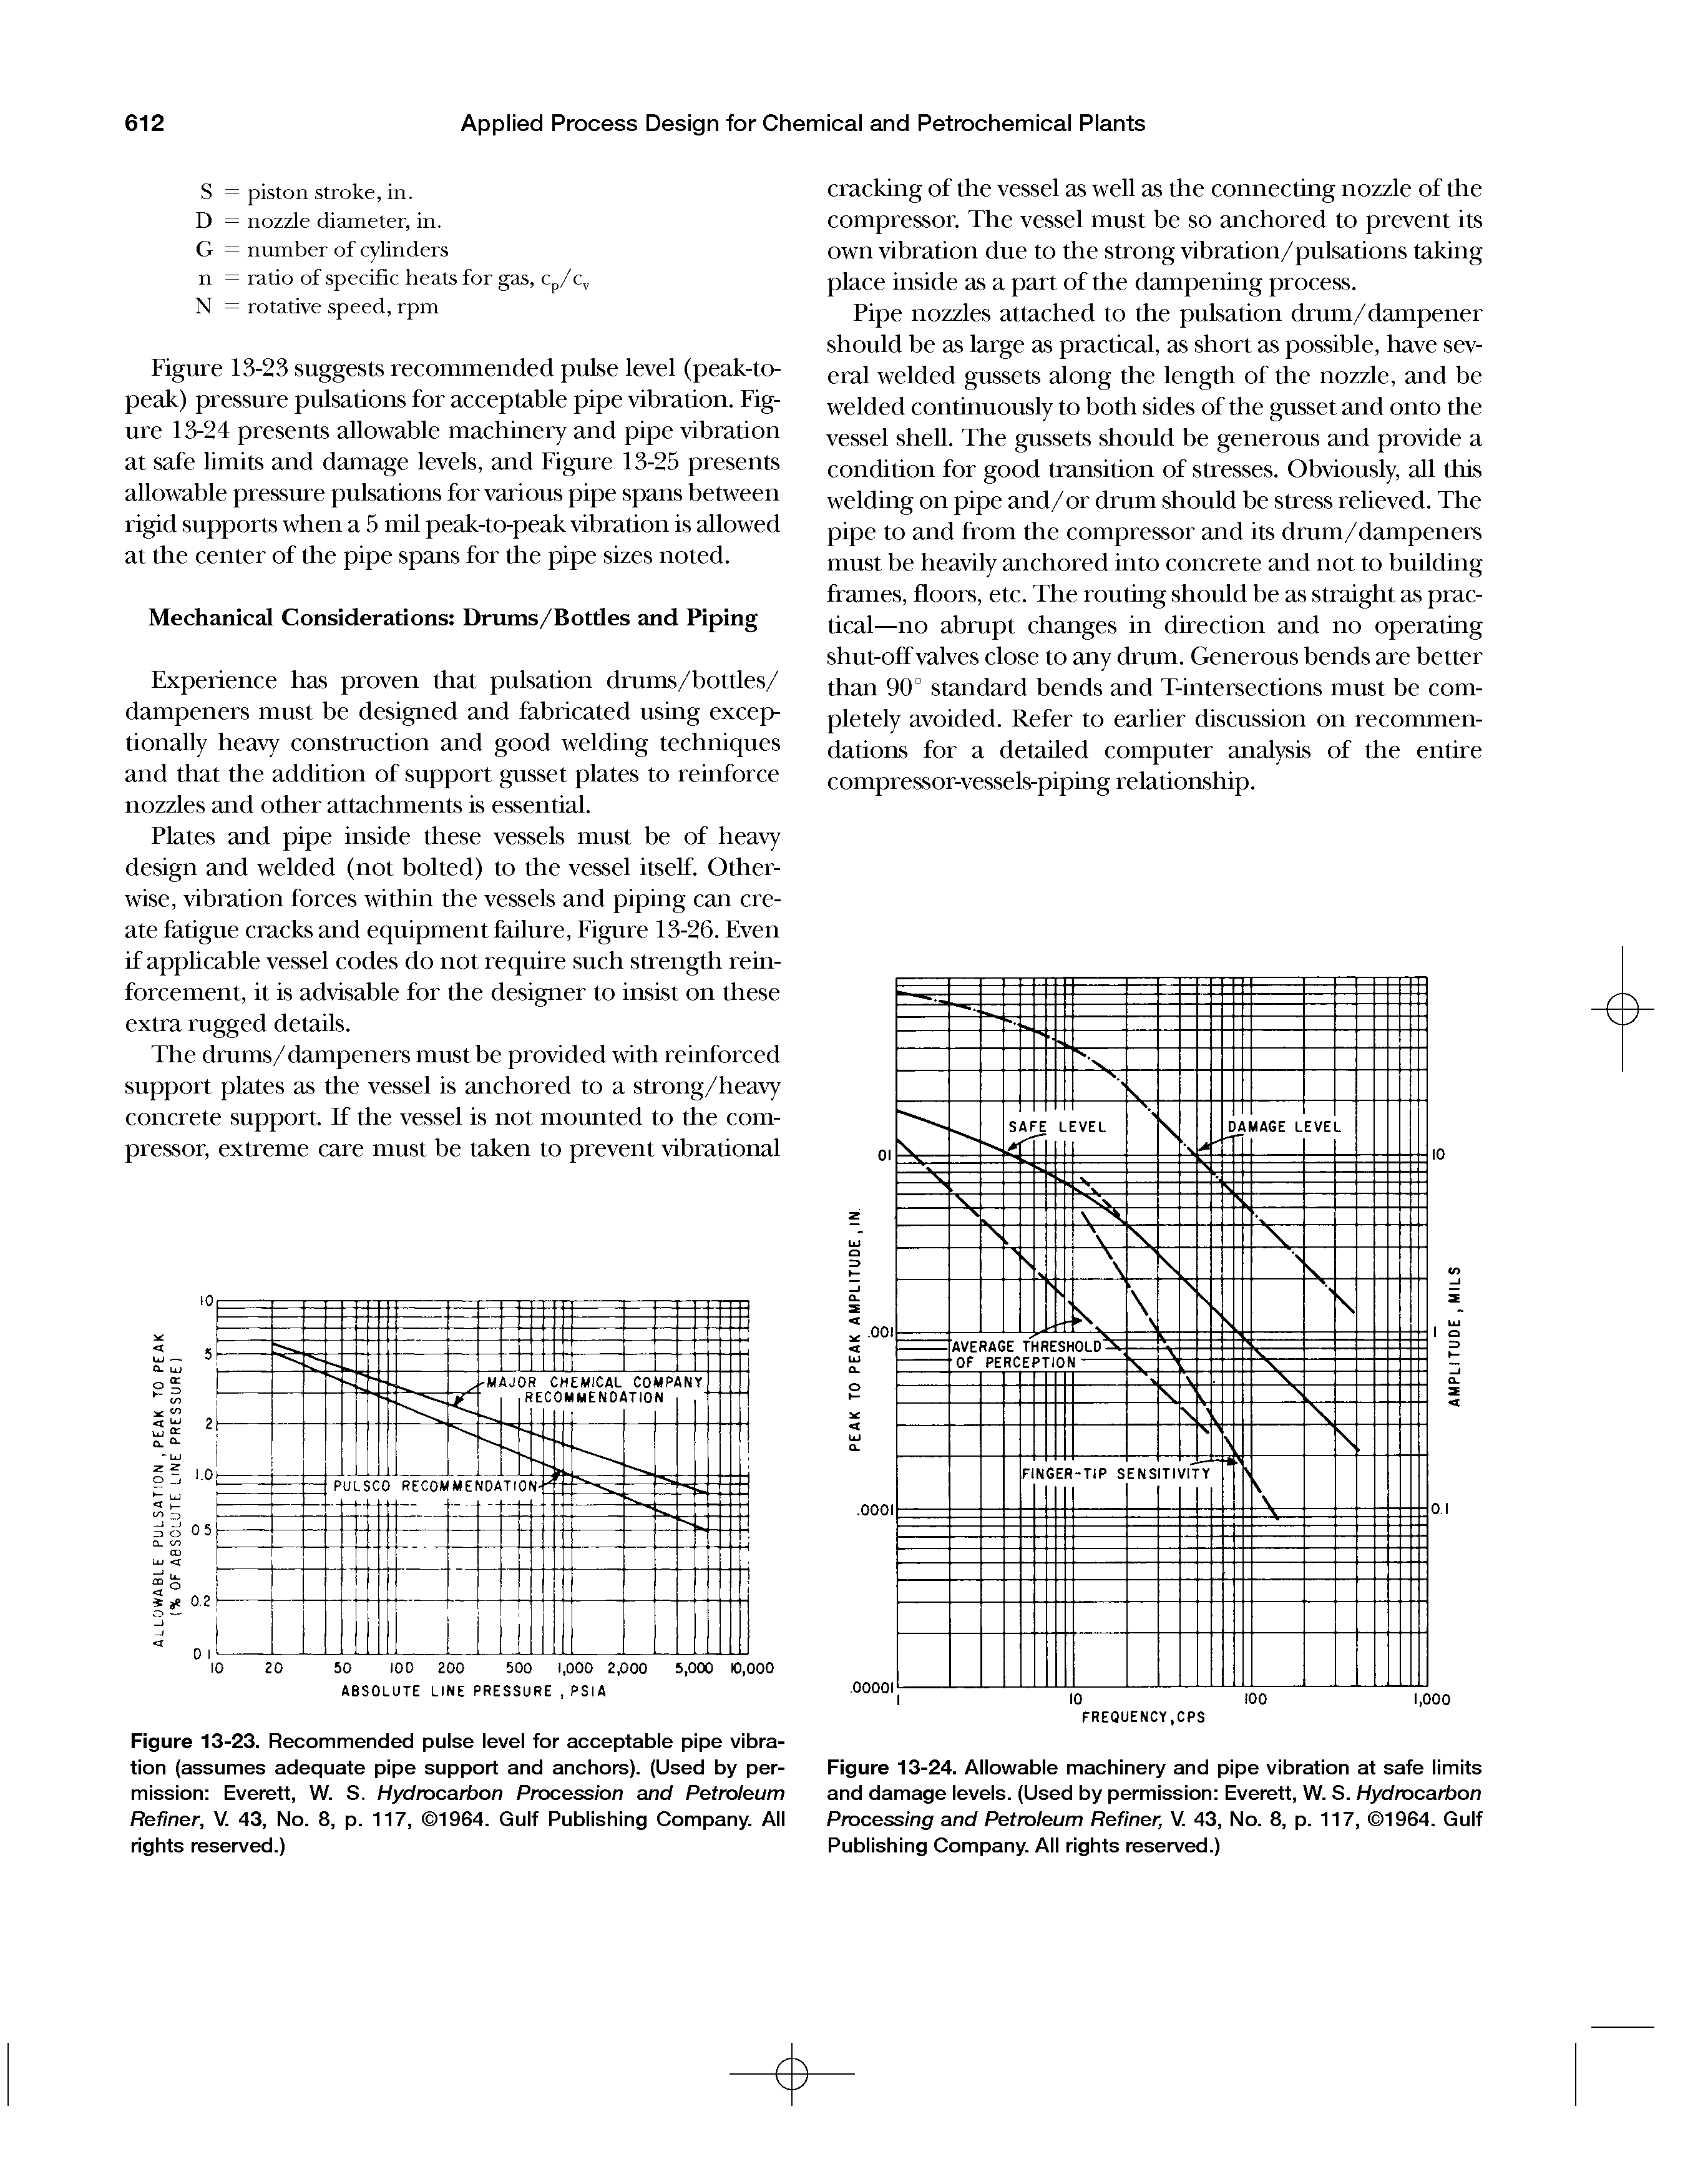 Figure 13-23. Recommended pulse level for acceptable pipe vibration (assumes adequate pipe support and anchors). (Used by permission Everett, W. S. Hydrocarbon Procession and Petroleum Refiner, V. 43, No. 8, p. 117, 1964. Gulf Publishing Company. All rights reserved.)...